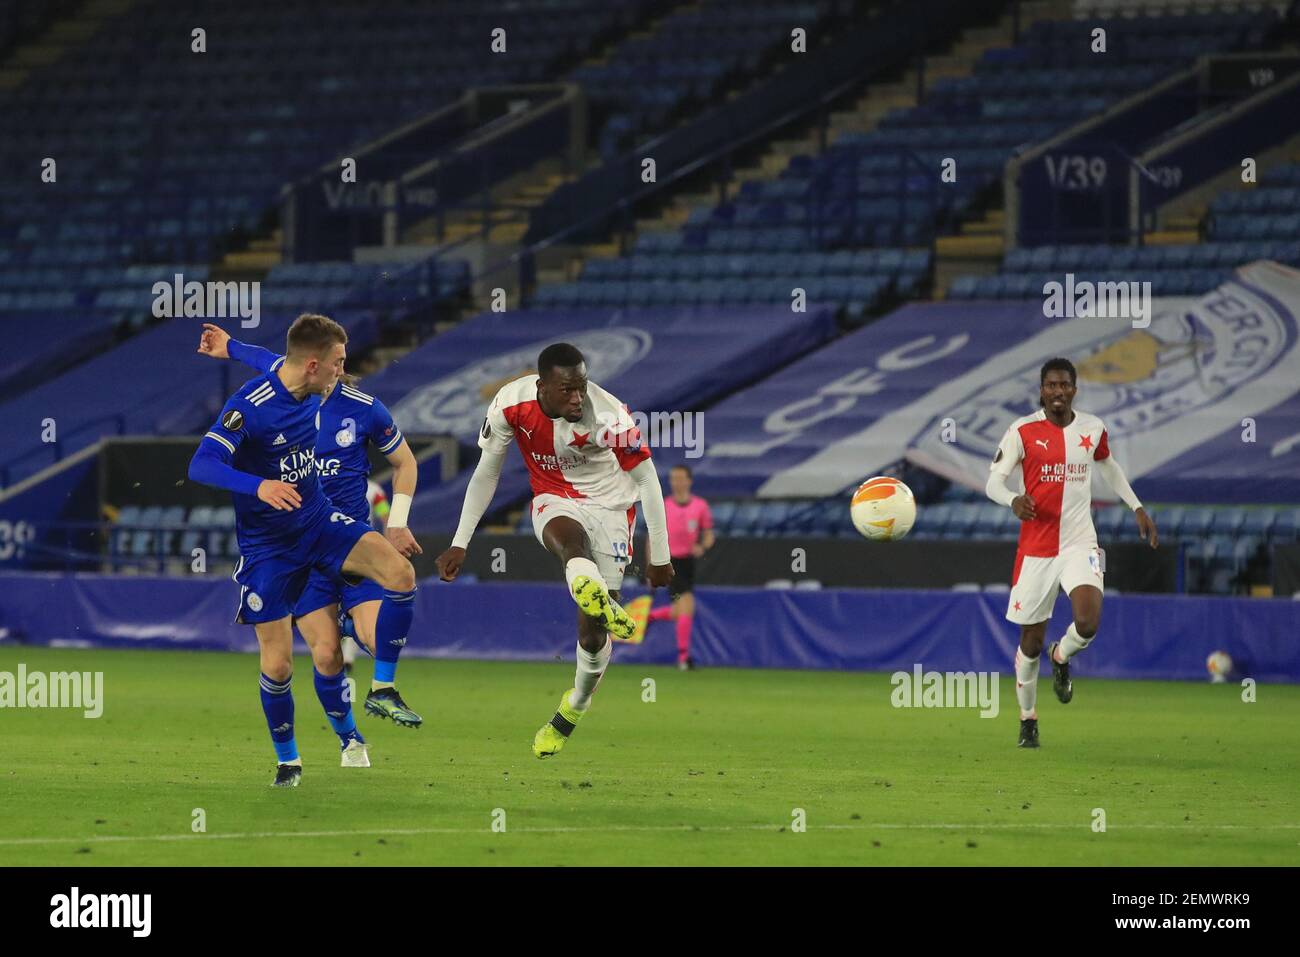 Leicester, UK. 25th Feb, 2021: Abdallah Sima (12) of Slavia Prague shoots on goal in, on 2/25/2021. (Photo by Mark Cosgrove/News Images/Sipa USA) Credit: Sipa USA/Alamy Live News Stock Photo